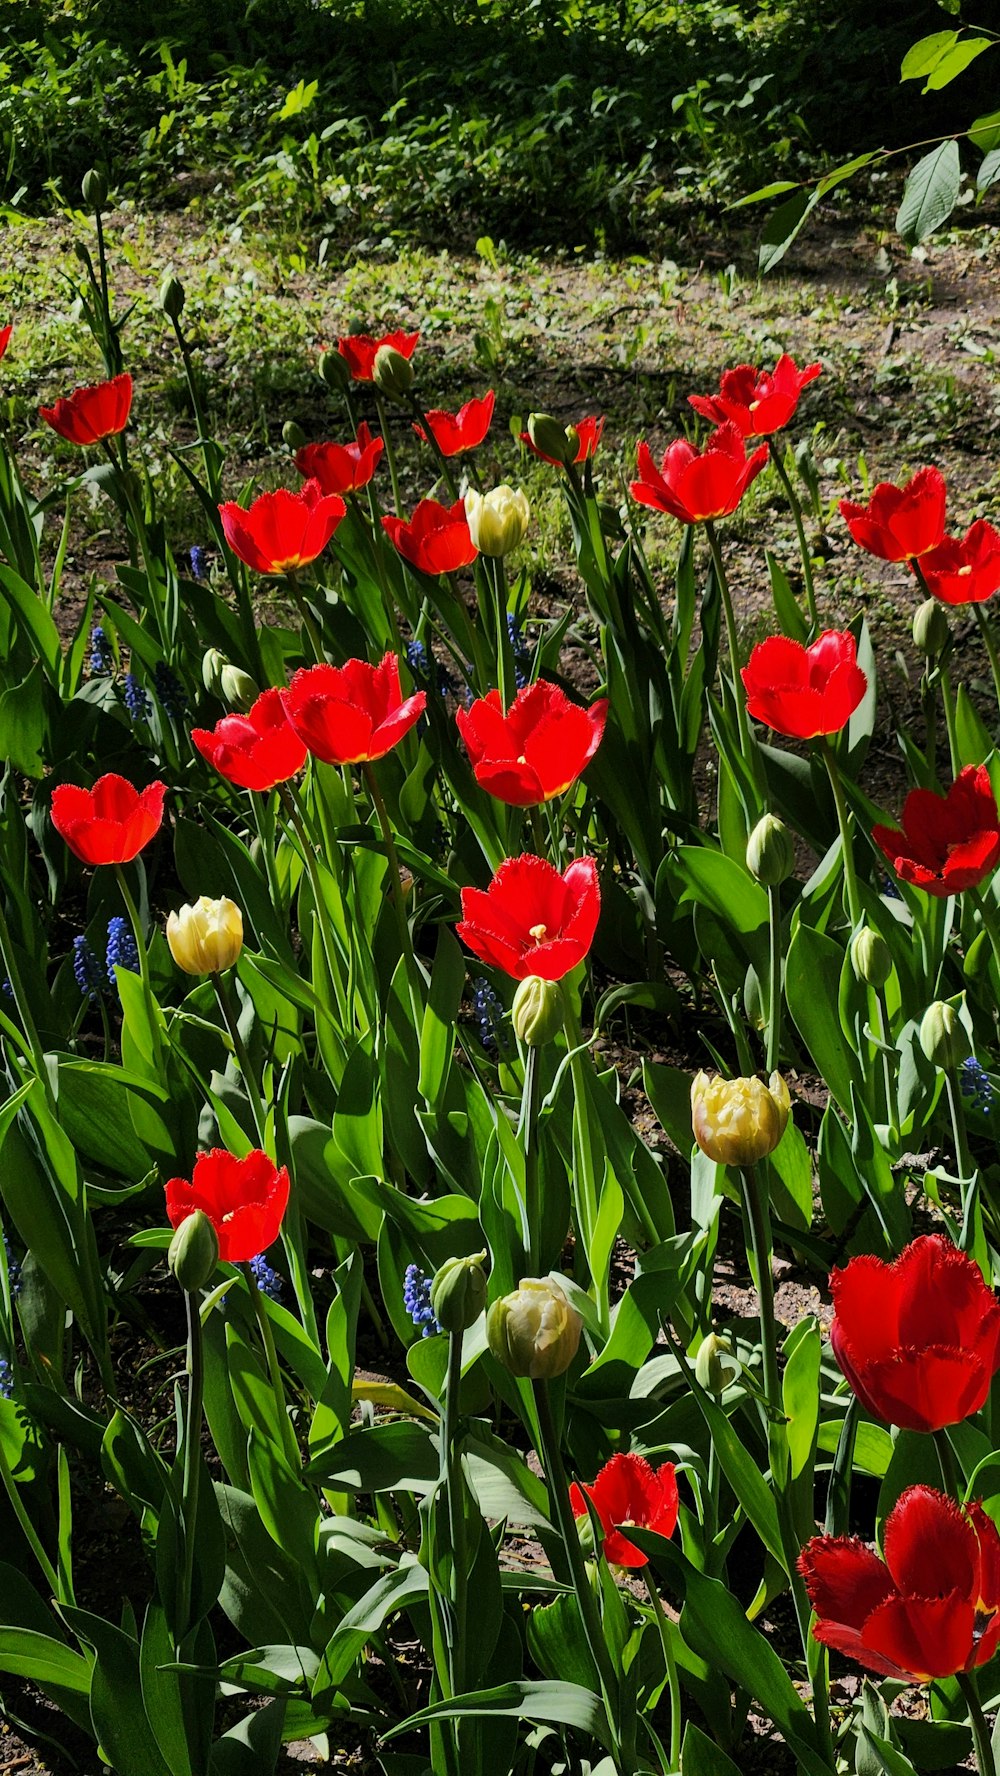 a field of red and yellow flowers in the grass